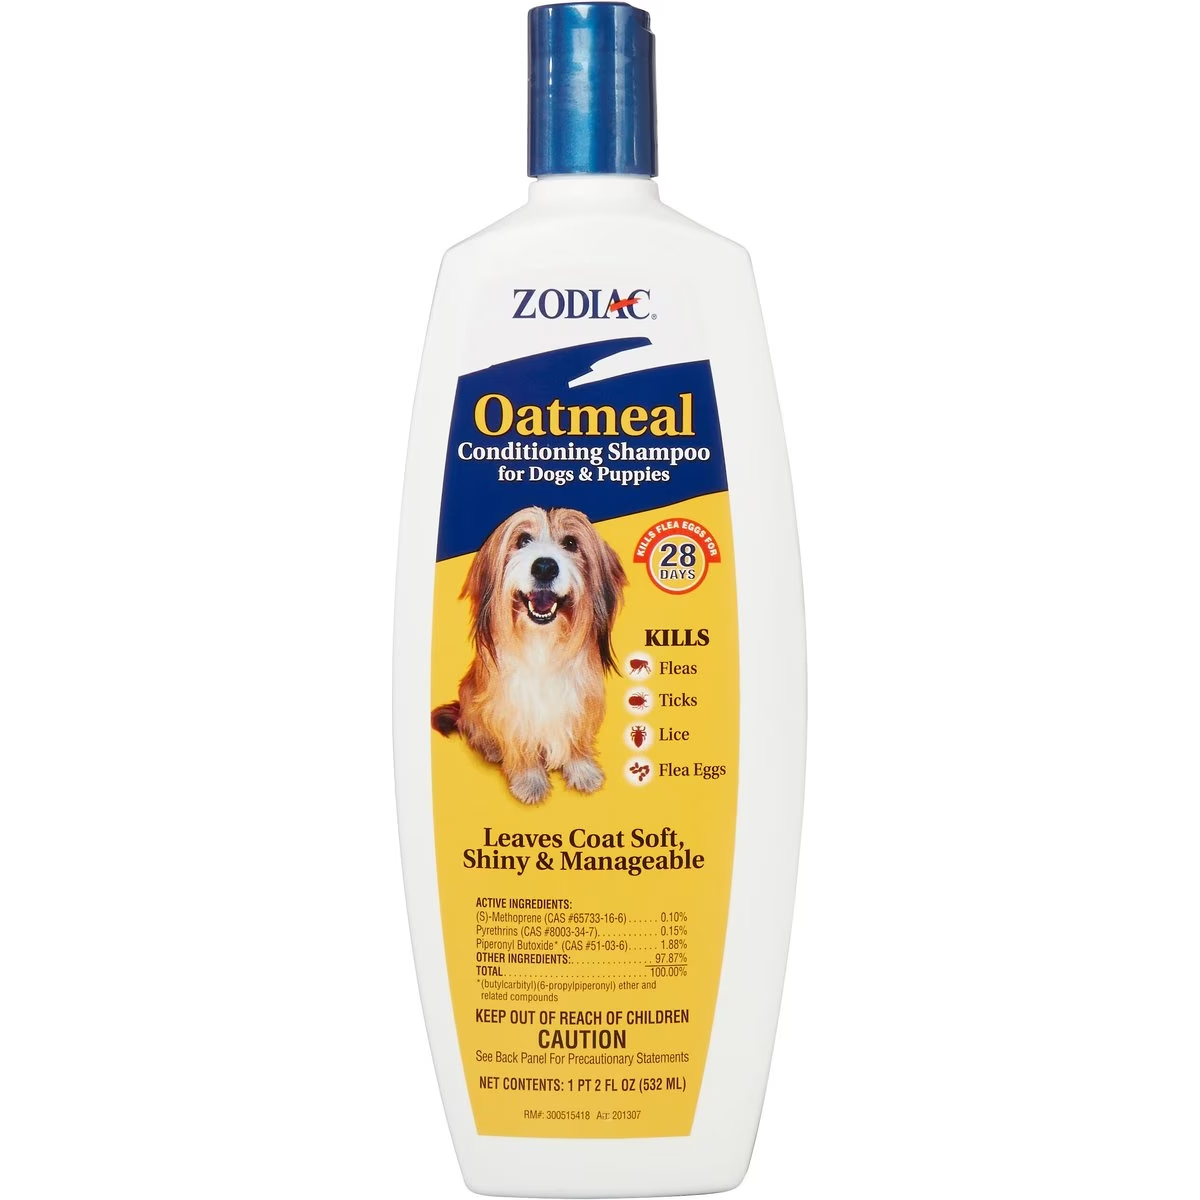 Zodiac Oatmeal Conditioning Flea & Tick Shampoo for Dogs & Puppies